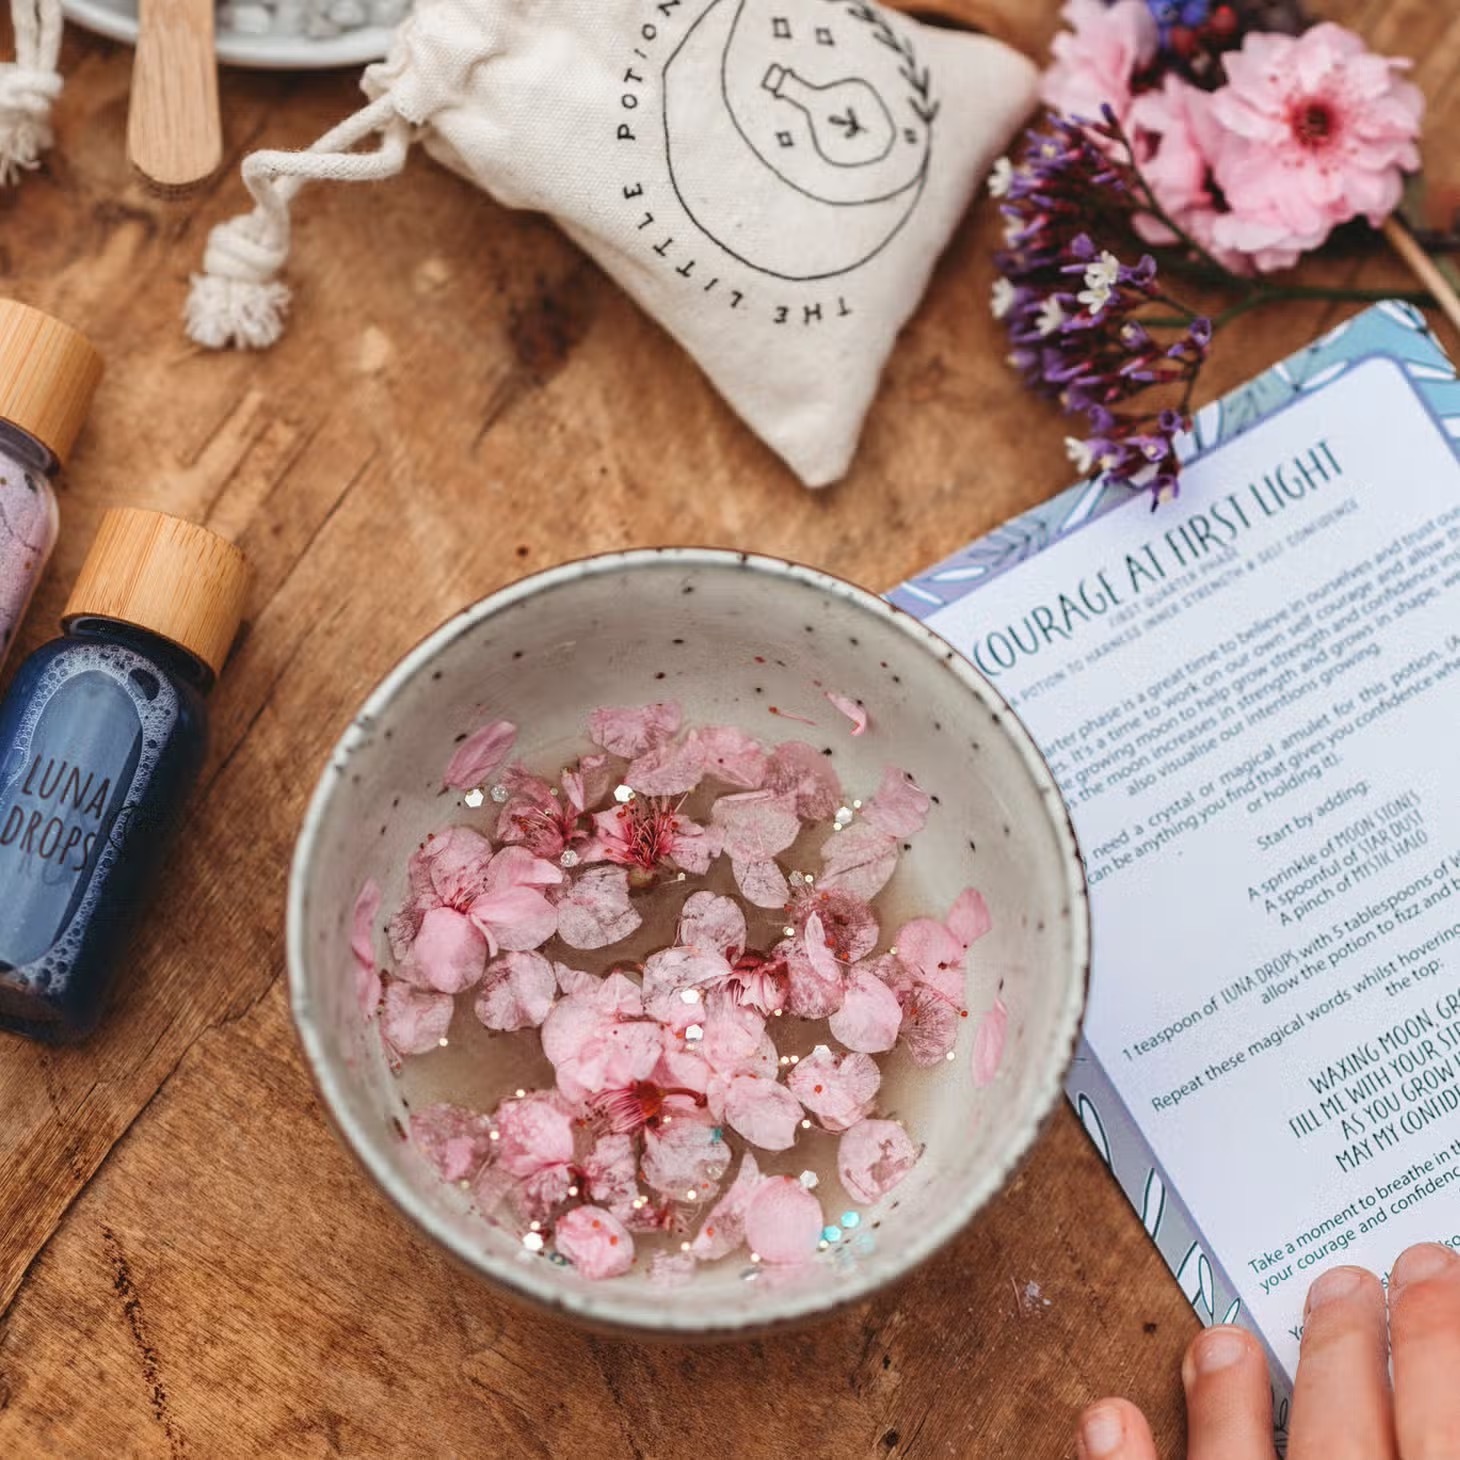 Moon Magic Mindful Potion Kit By The Little Potion Co